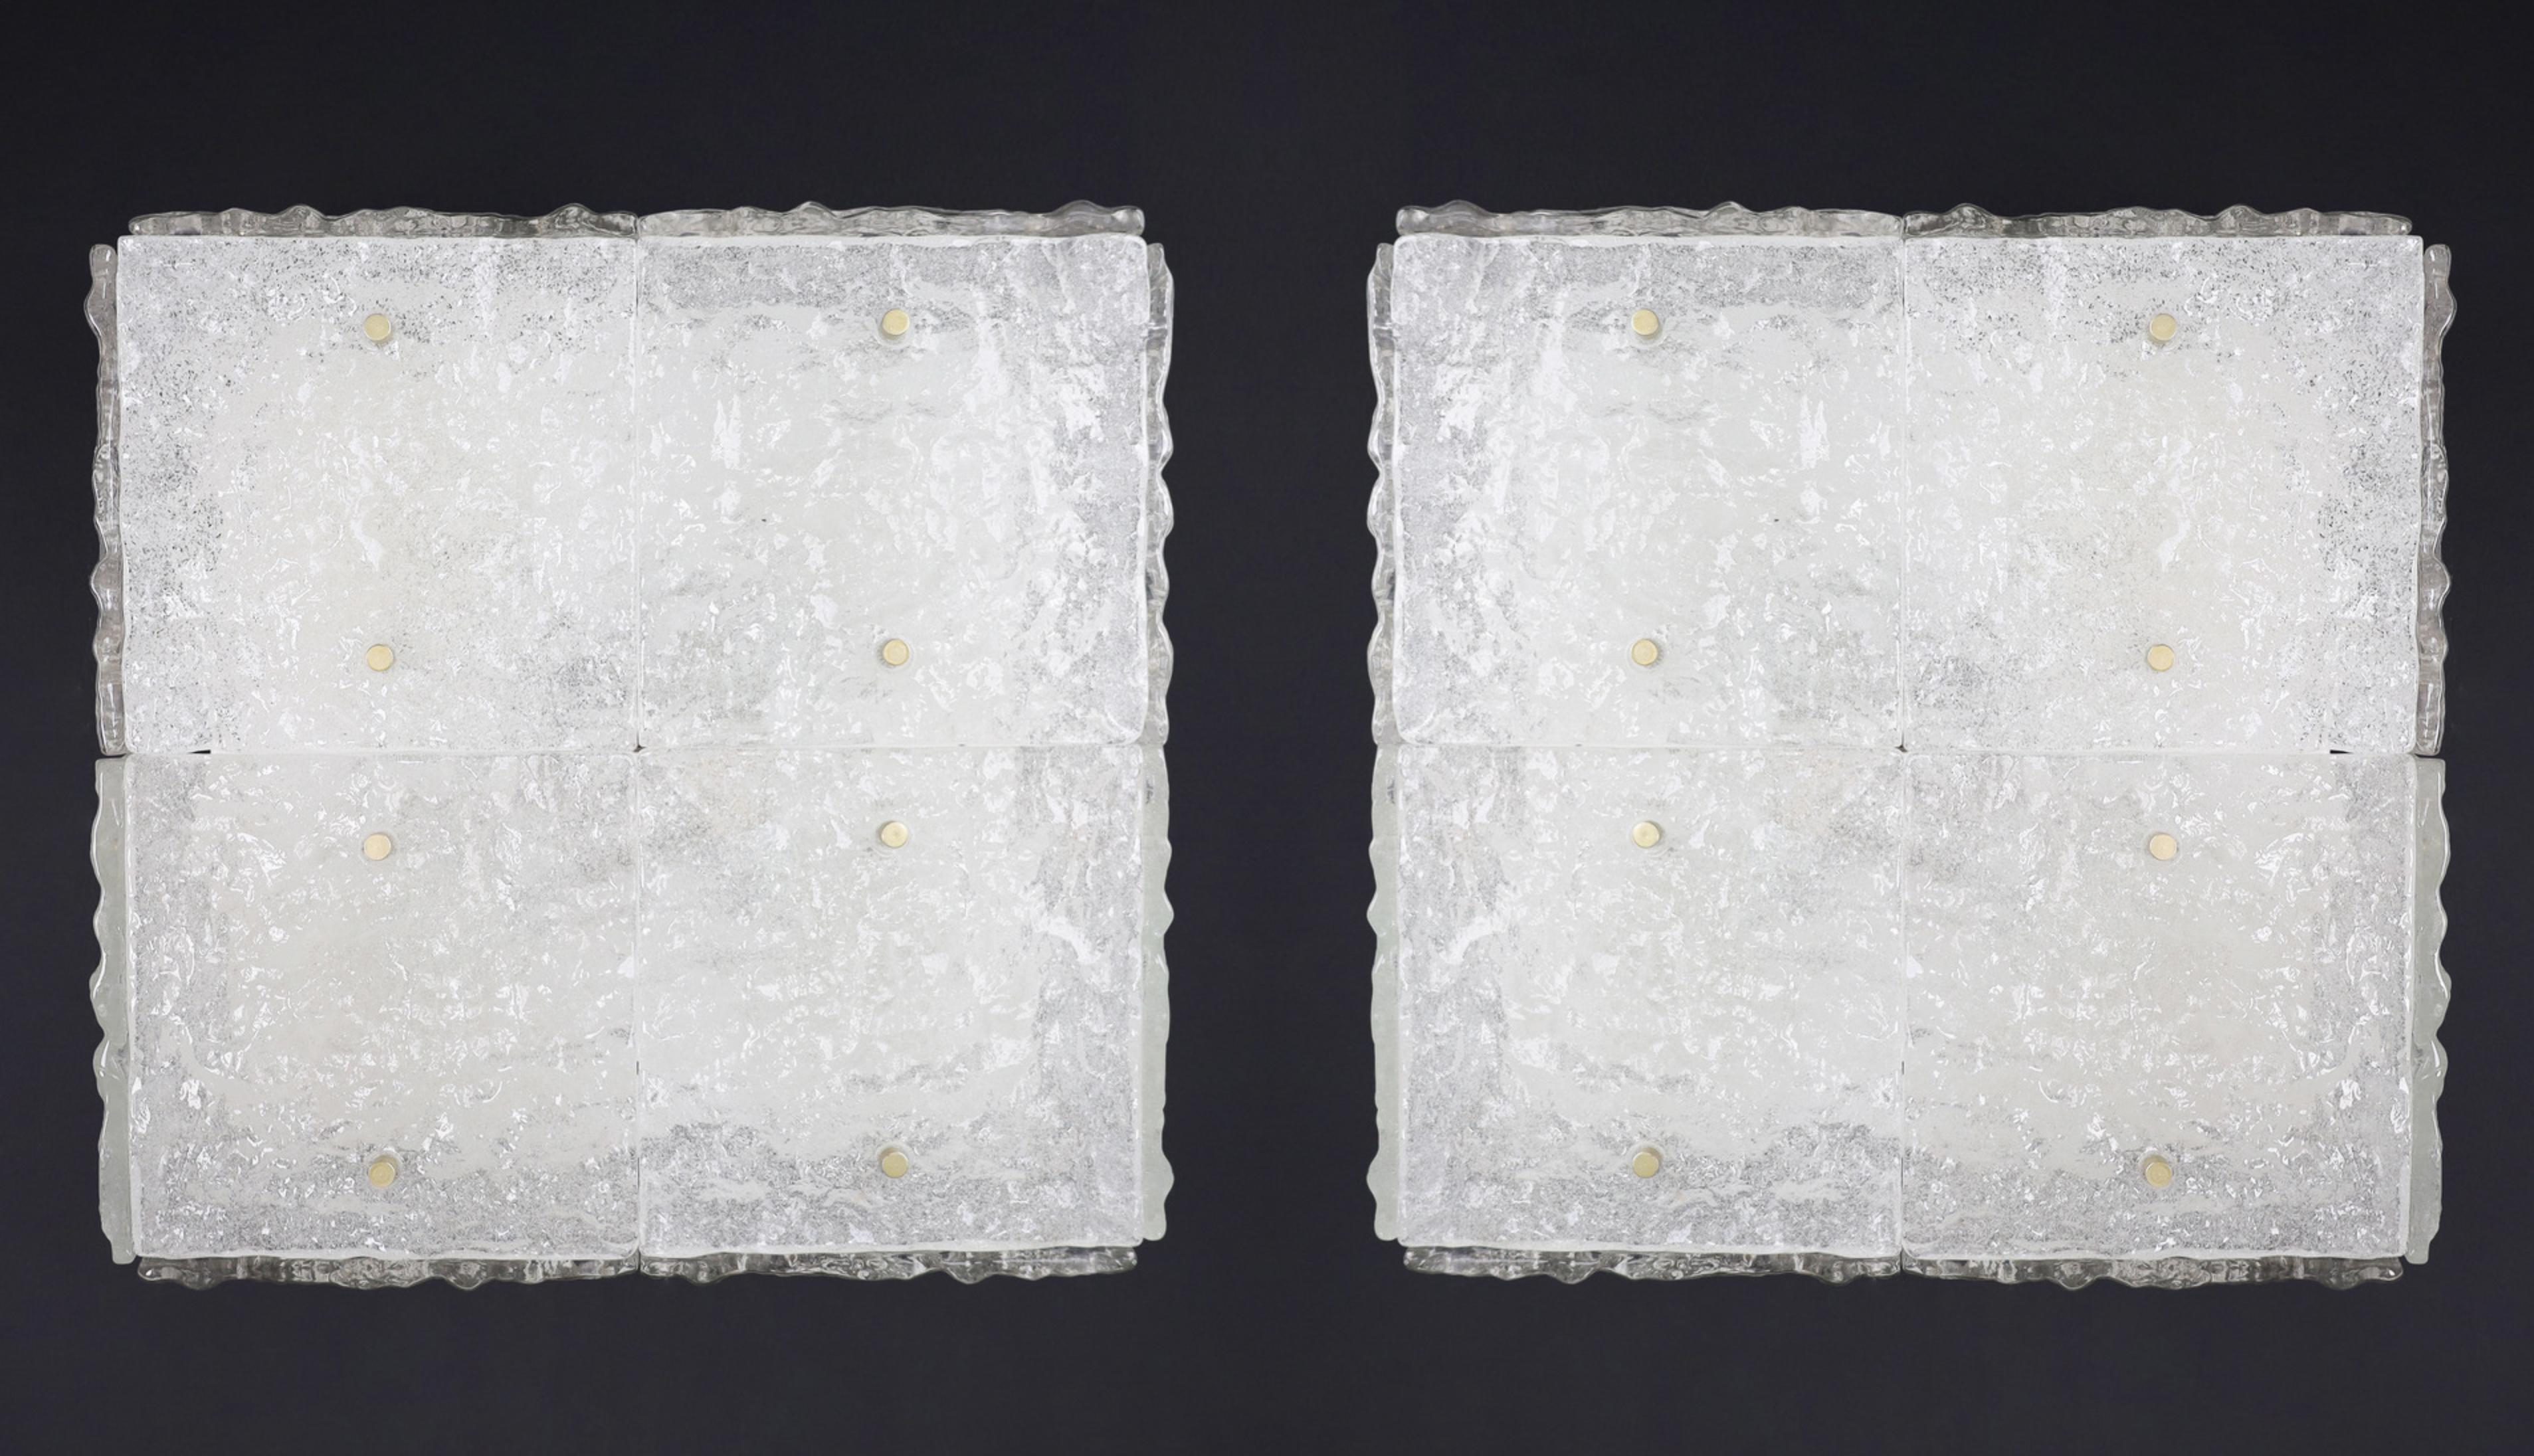 Pair of two Large Kalmar Ice Glass Flush-Mount or Wall lights, Austria 1960s

This is a beautiful set of two large ceiling lamps or wall lights made by Kalmar in Austria during the 1960s. These lights comprise 12 thick textured ice glass pieces